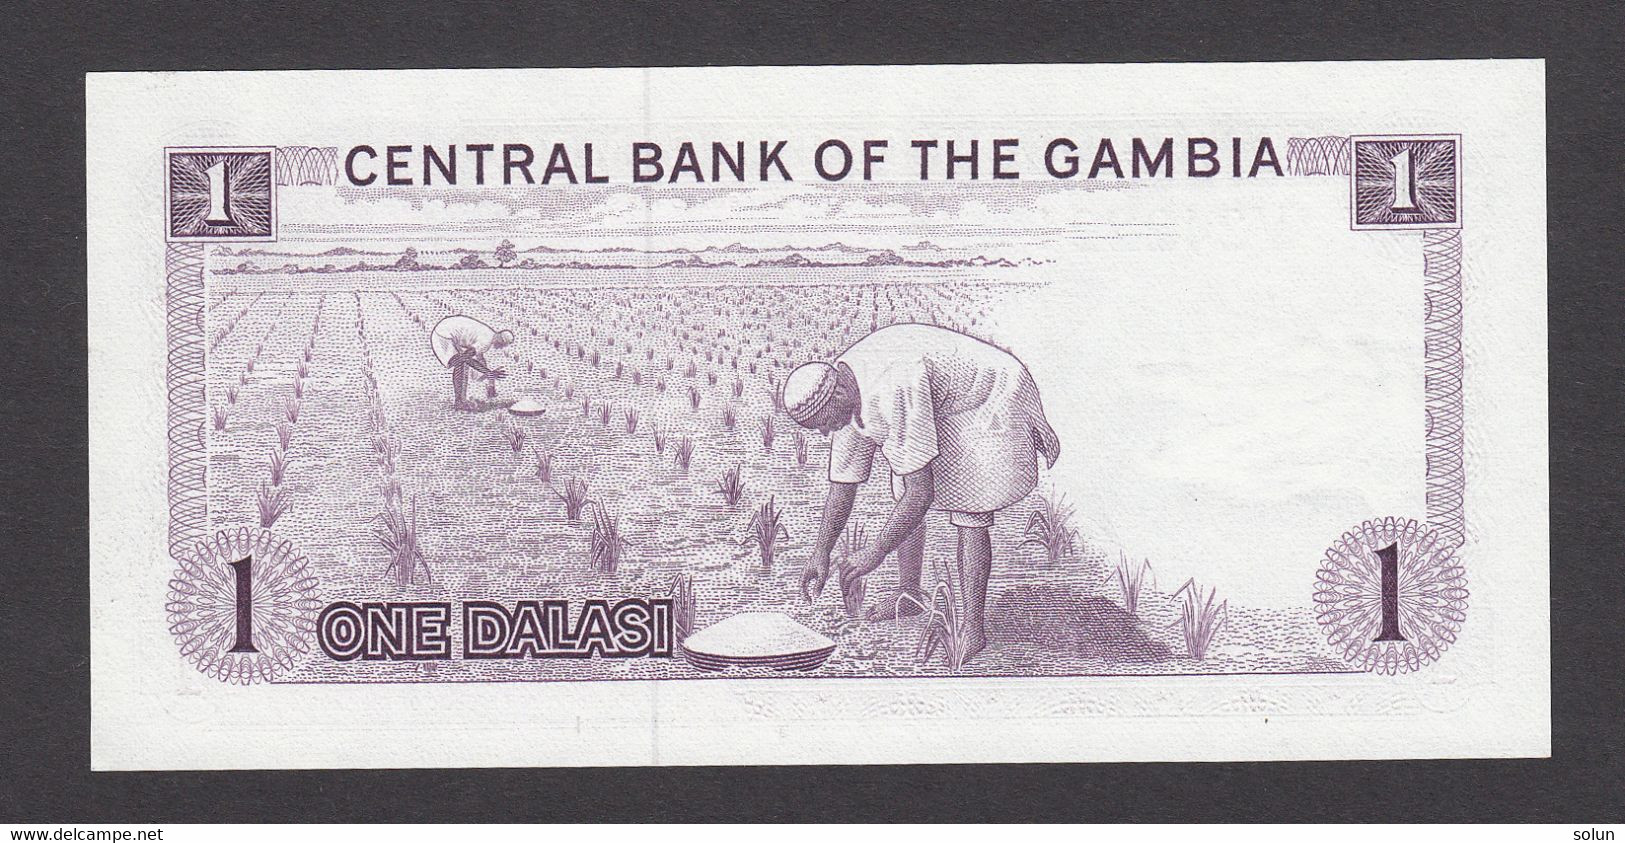 1 ONE DALASI  CENTRAL BANK OF THE GAMBIA  BANKNOTE - Gambie